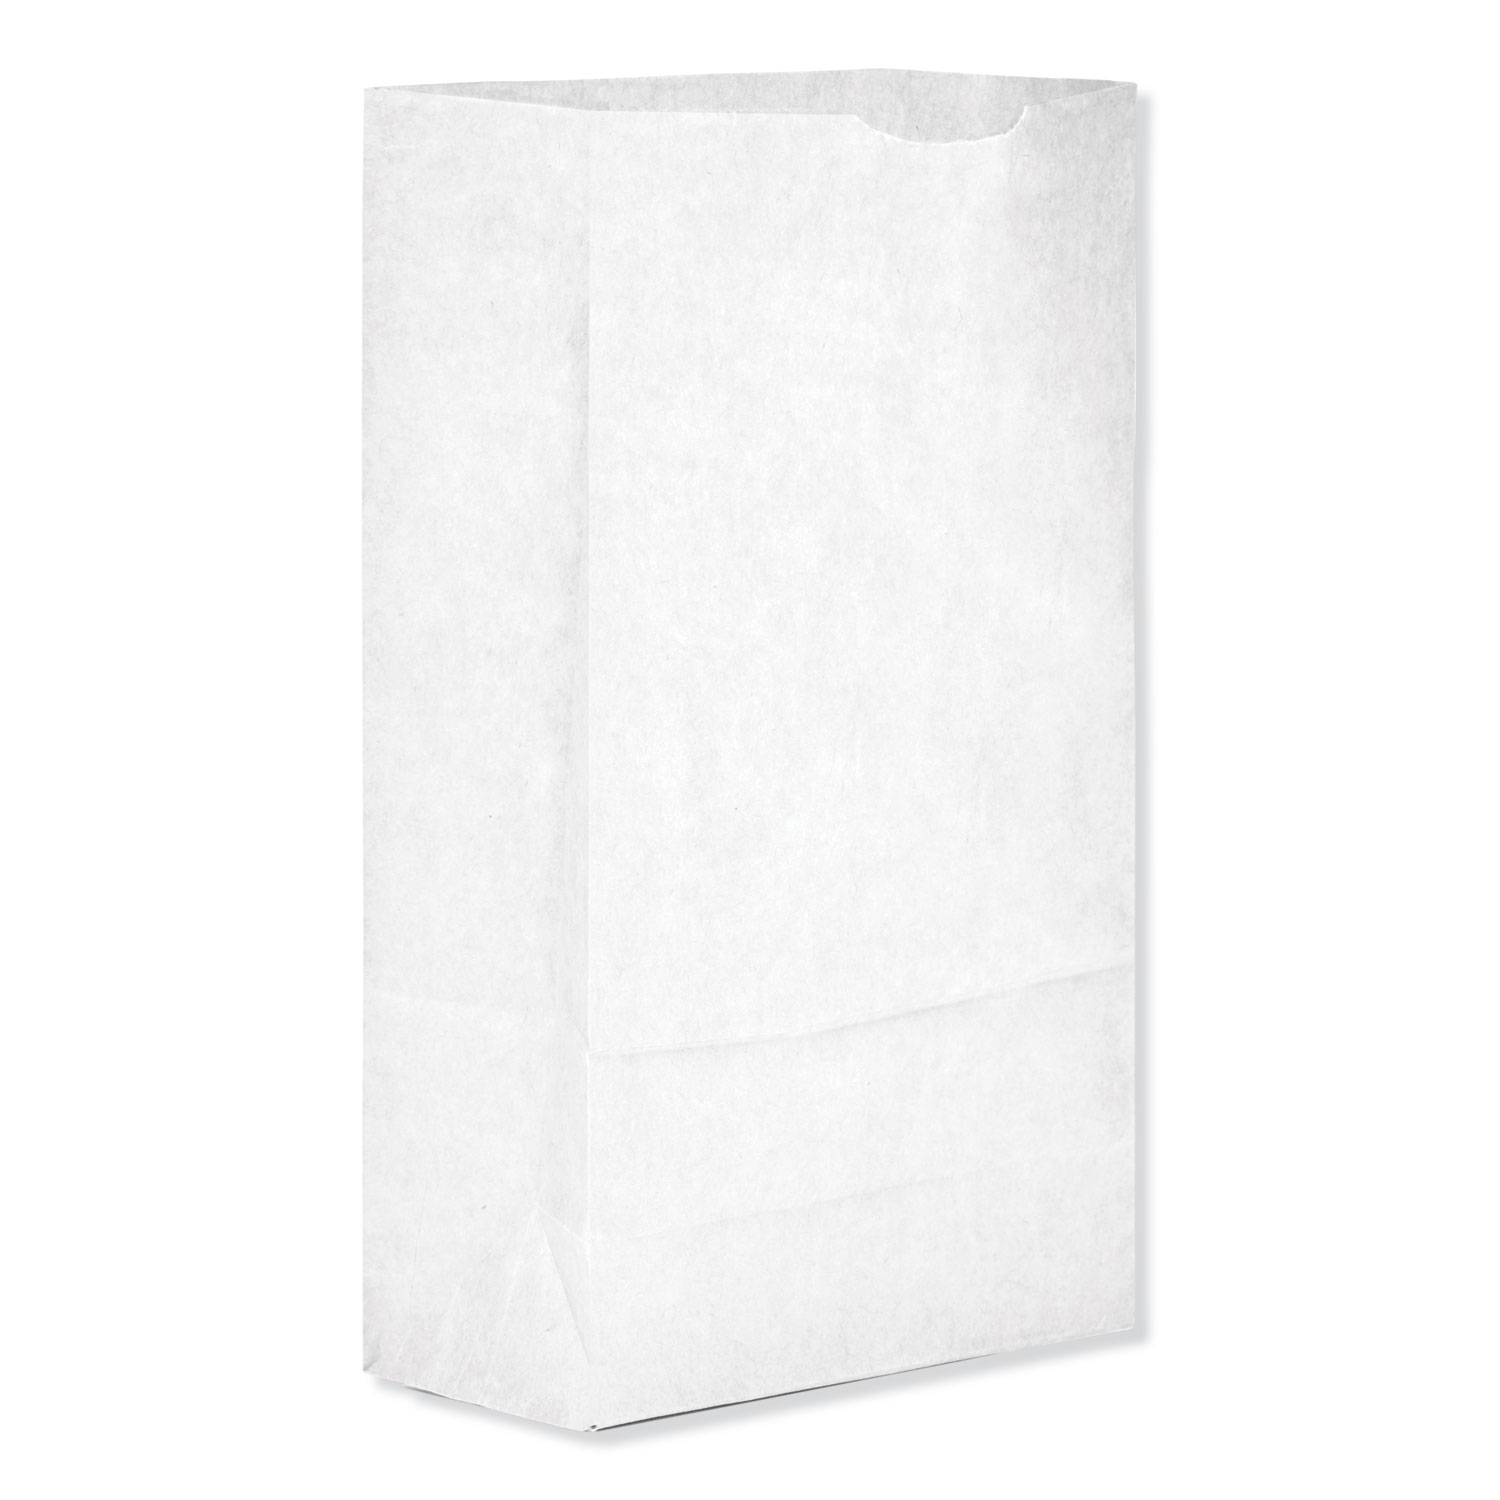  General 51046 Grocery Paper Bags, 35 lbs Capacity, #6, 6w x 3.63d x 11.06h, White, 500 Bags (BAGGW6500) 